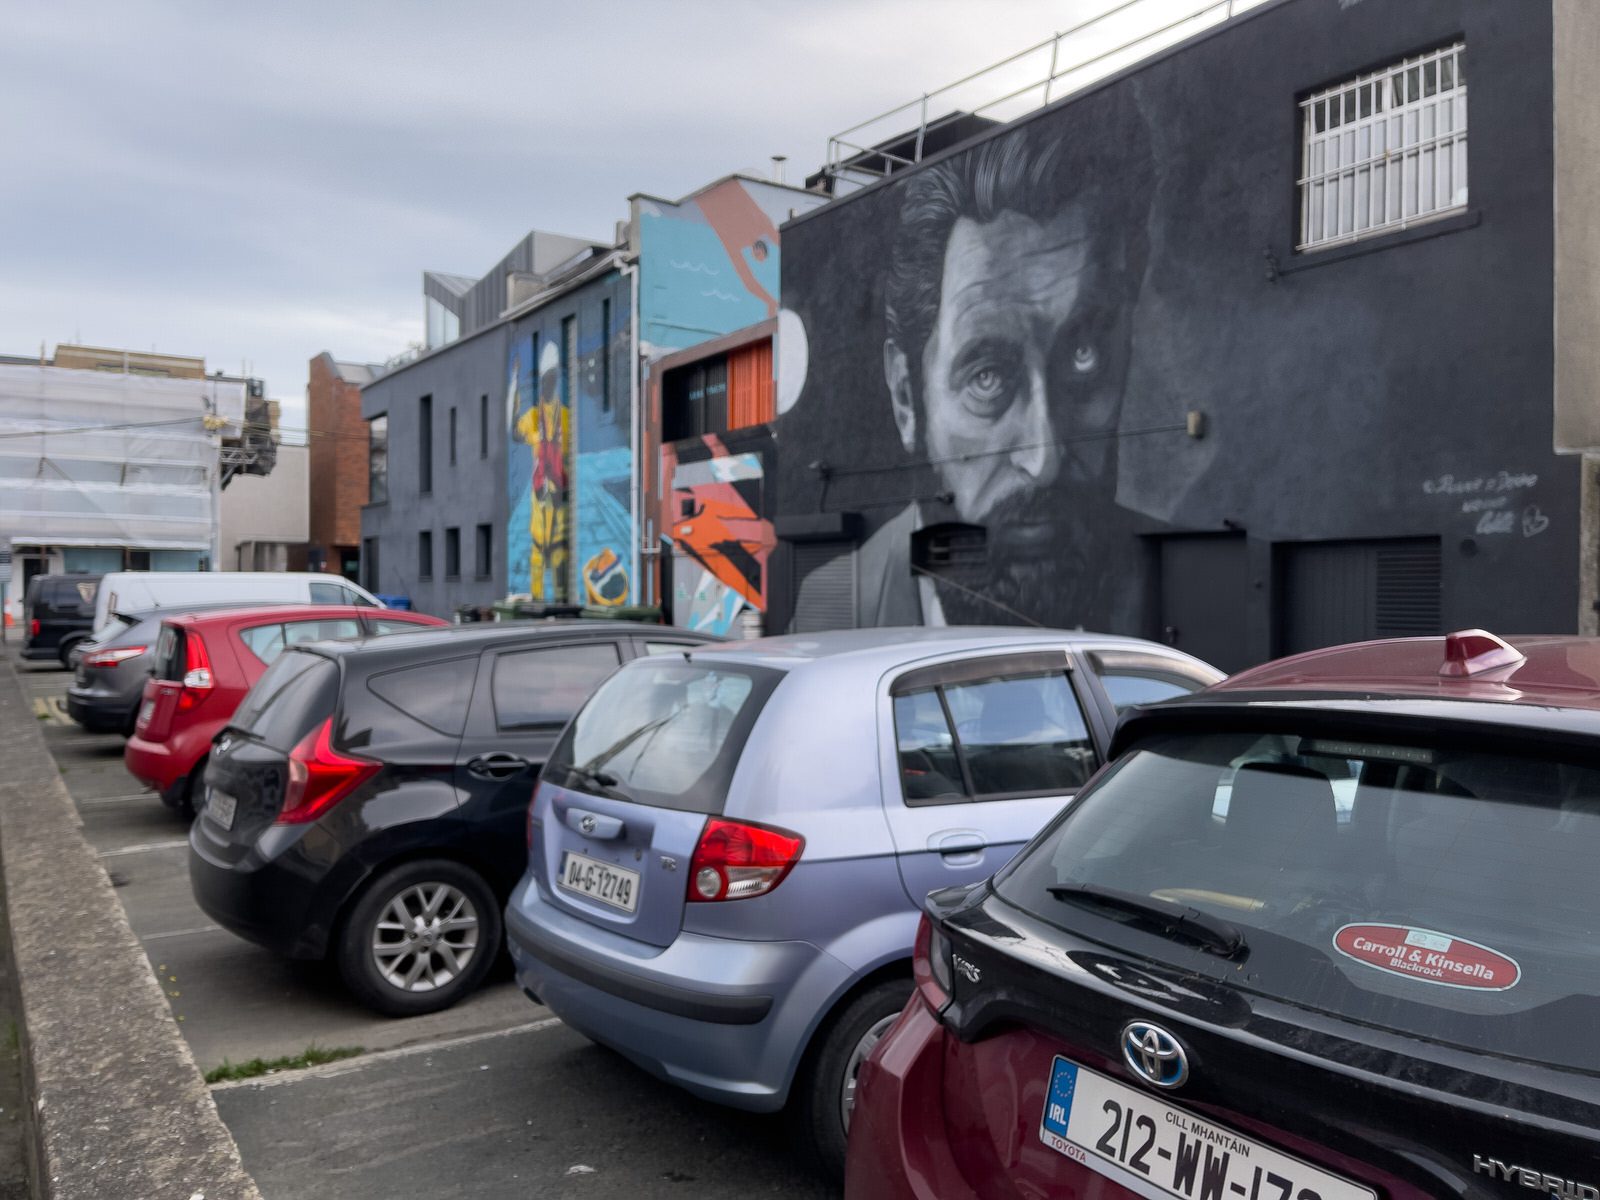 MURALS IN DUN LAOGHAIRE [SECOND SELECTION OF RANDOM IMAGES - ANSEO STREET ART PROJECT] 010